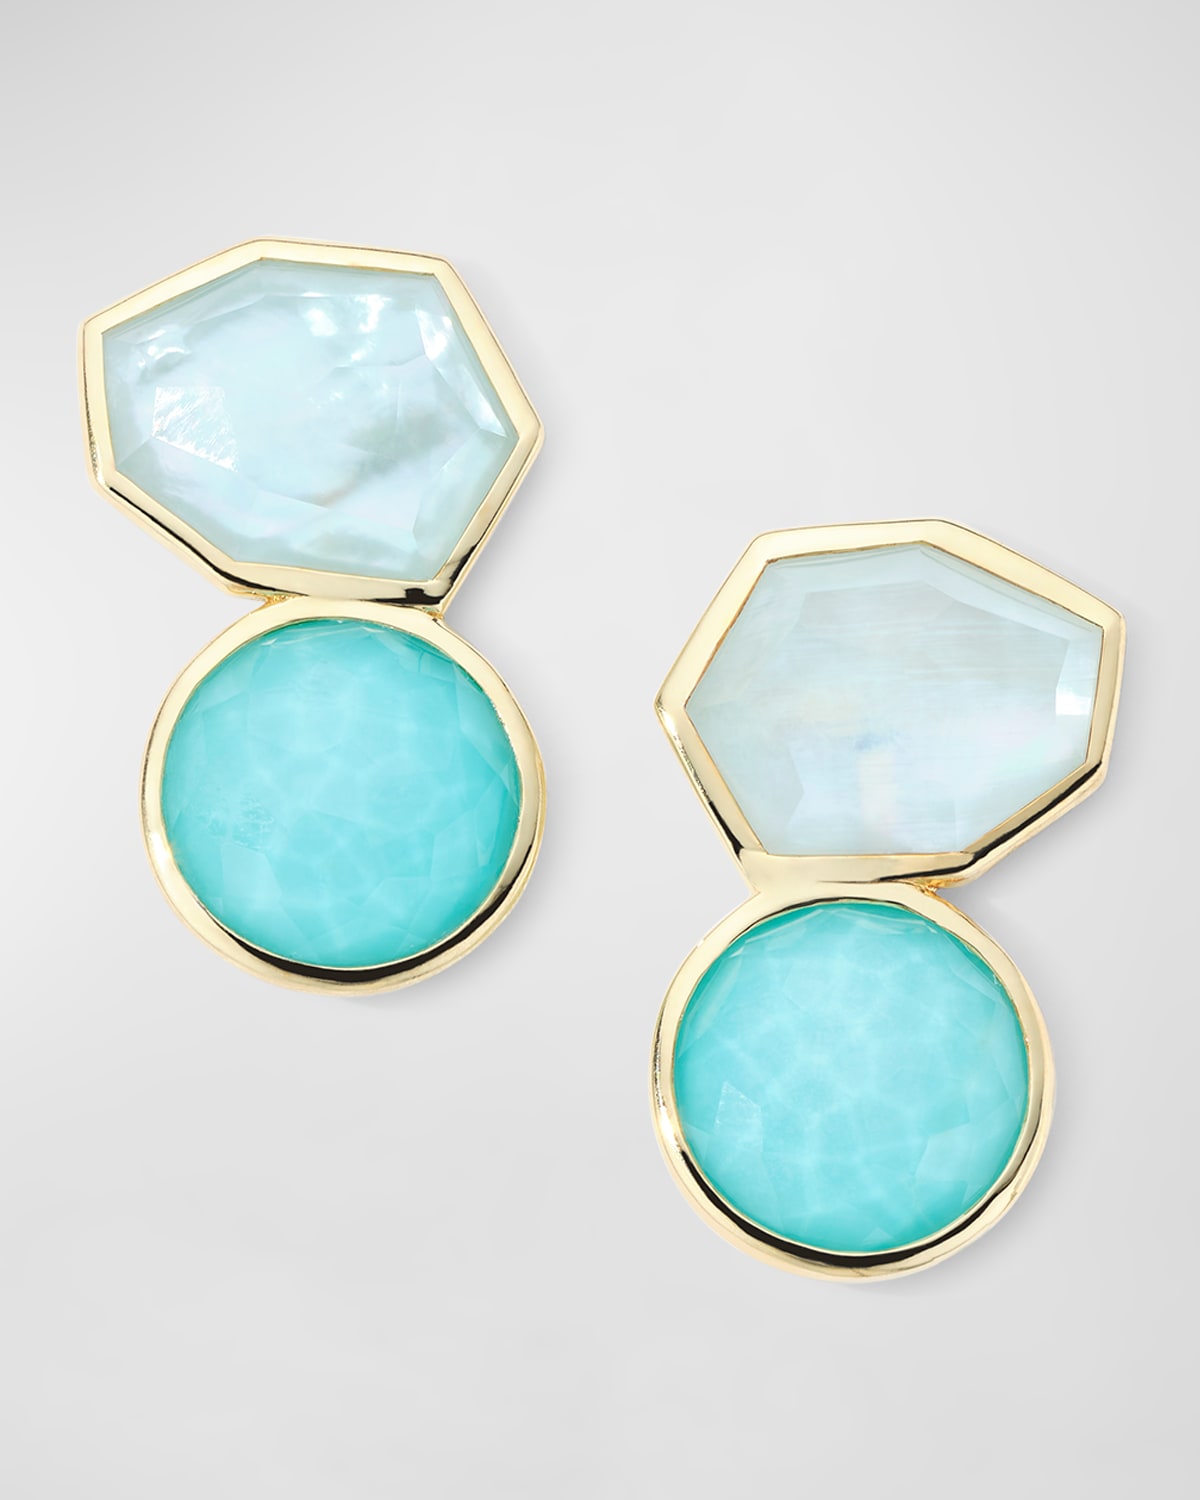 18K Rock Candy Large 2-Stone Post and Omega Earrings in Mother of Pearl/Amazonite Triplet with Turquoise Doublet